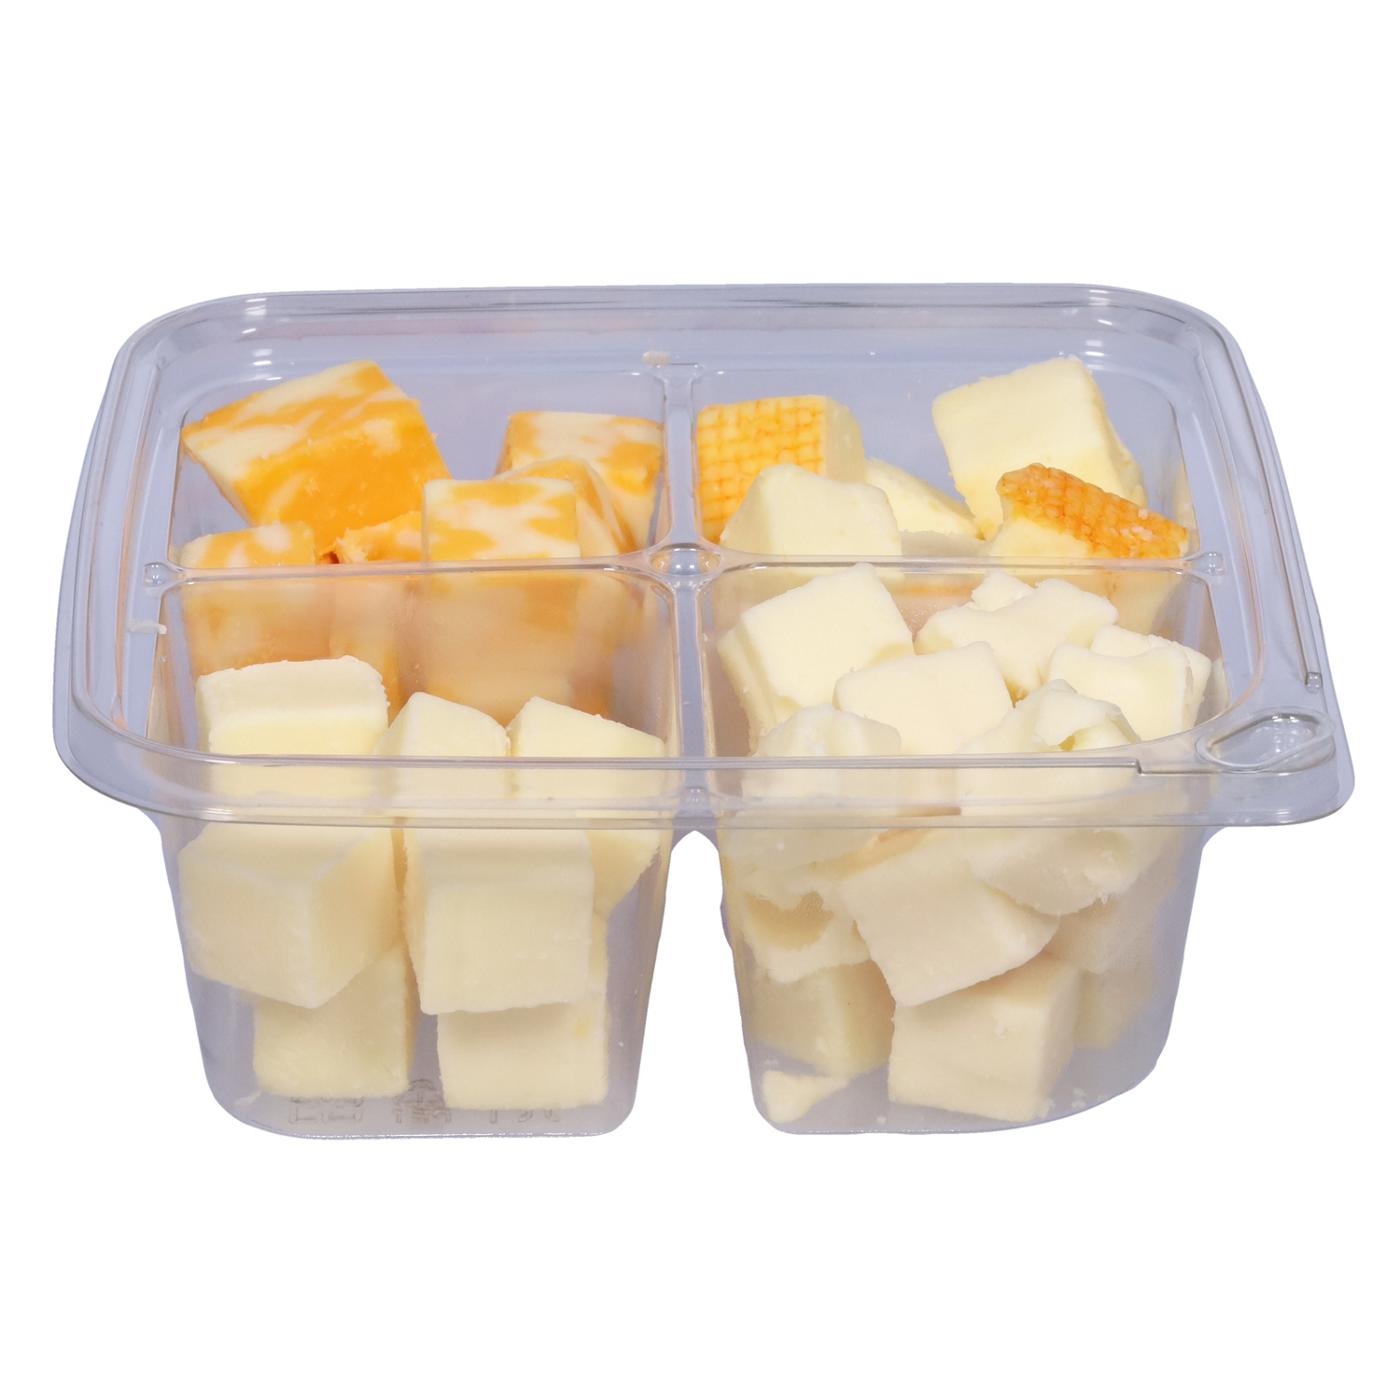 H-E-B Deli 4-Variety Cheese Cubes; image 3 of 3